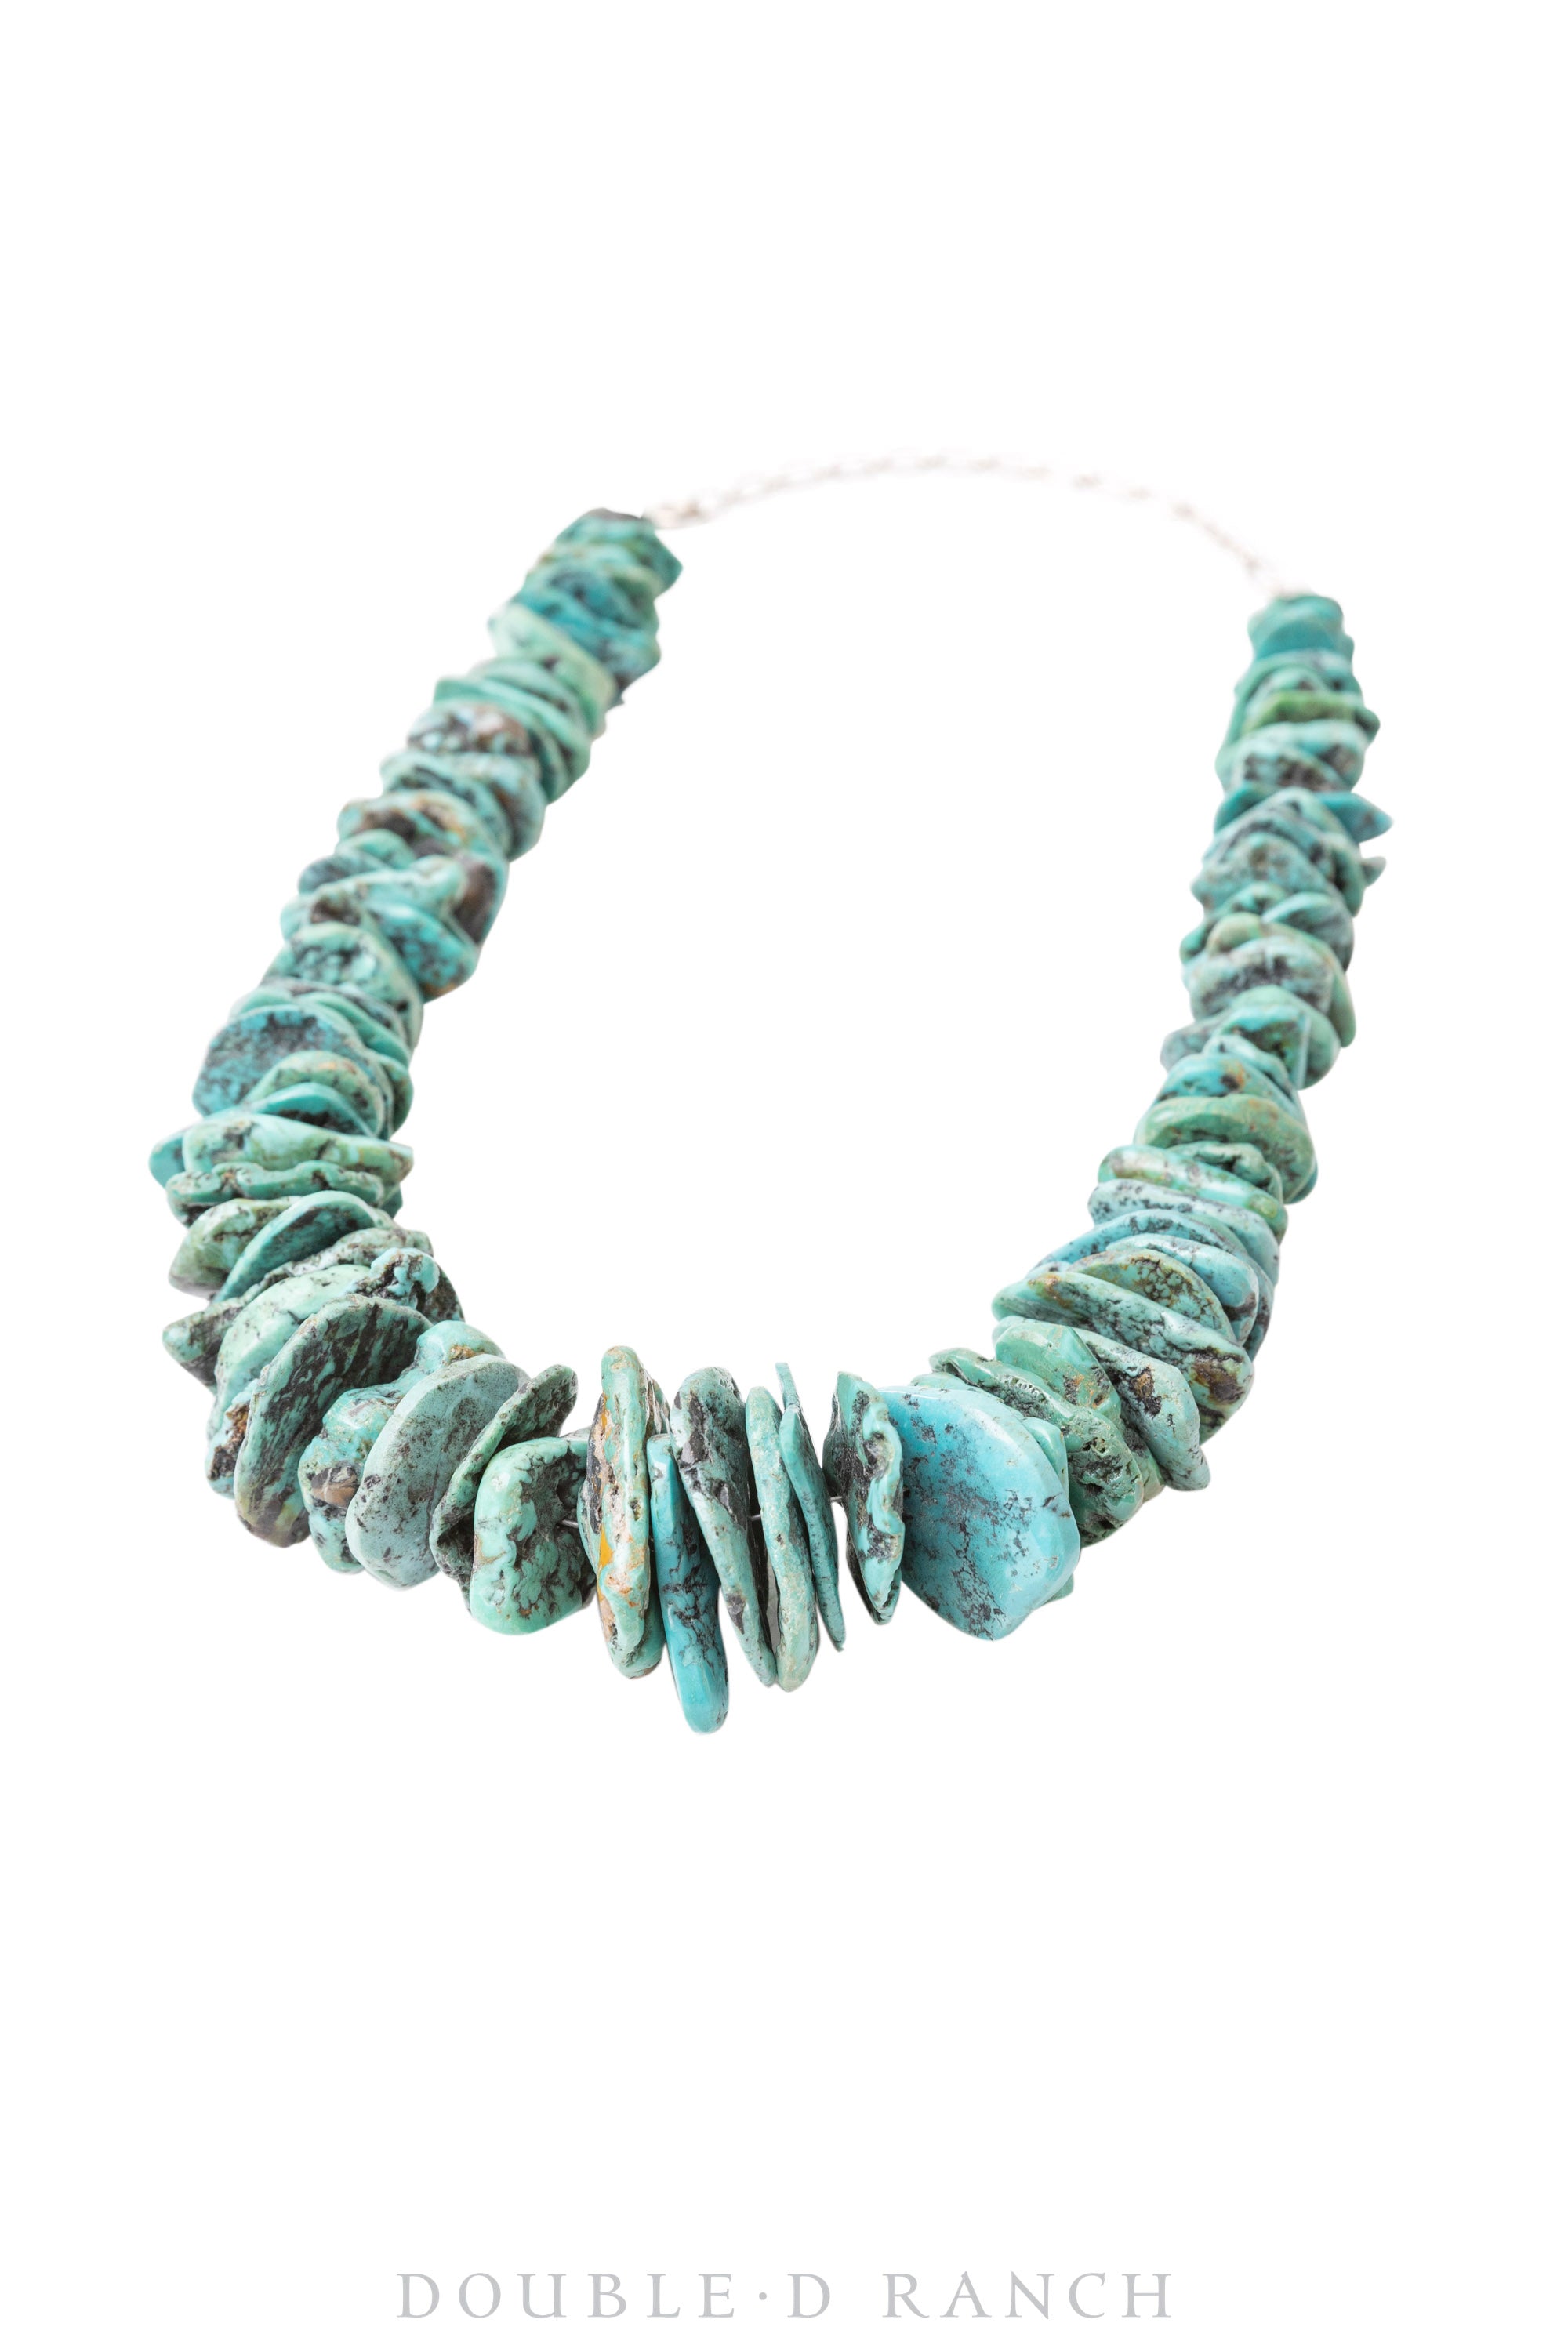 Necklace, Natural Stone, Turquoise, Slabs, Vintage, 1904